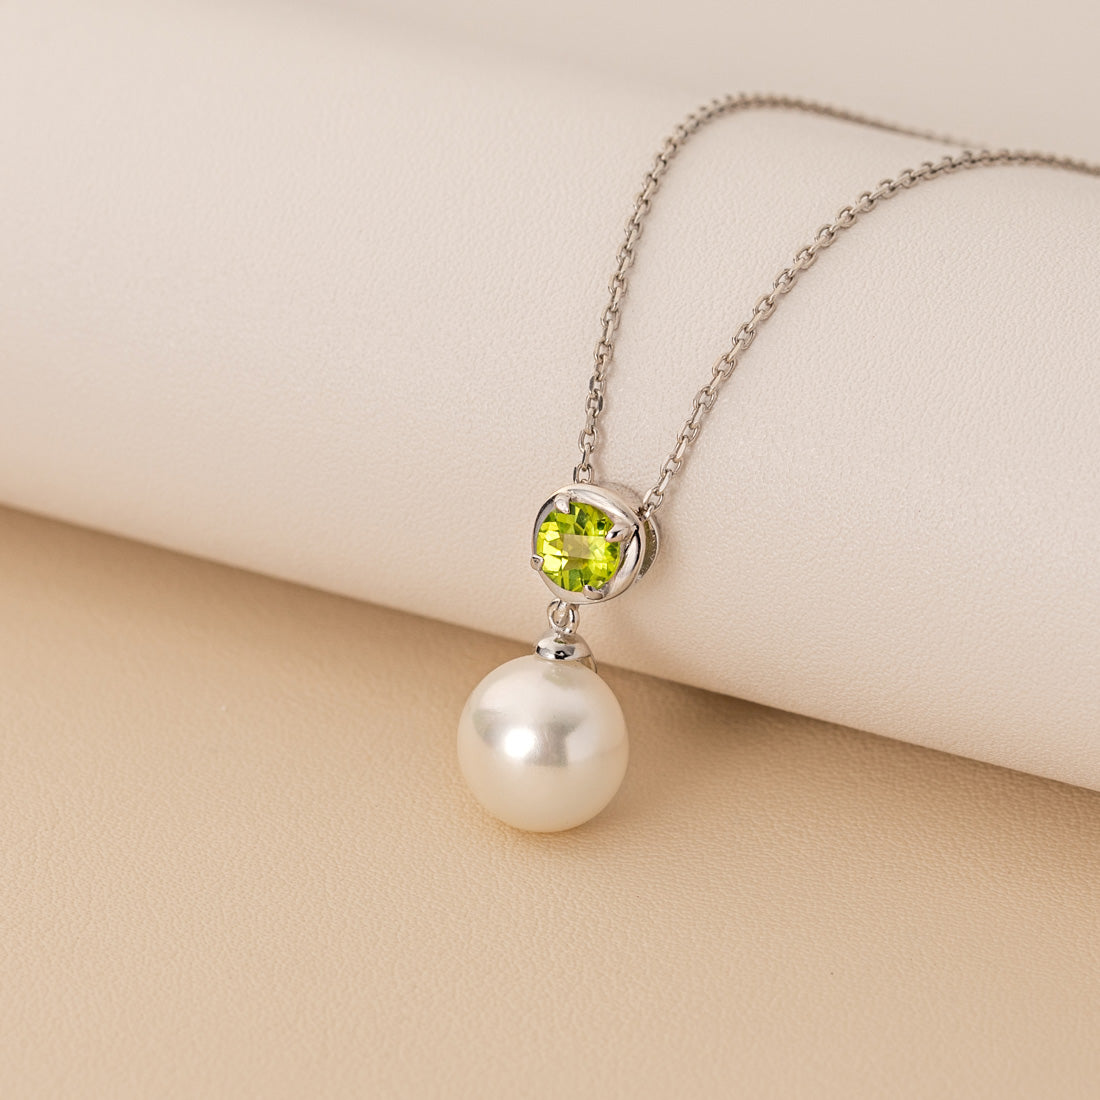 Elaborate 9ct Gold Peridot & Seed Pearl Pendant Necklace - Necklaces from  Cavendish Jewellers Ltd UK